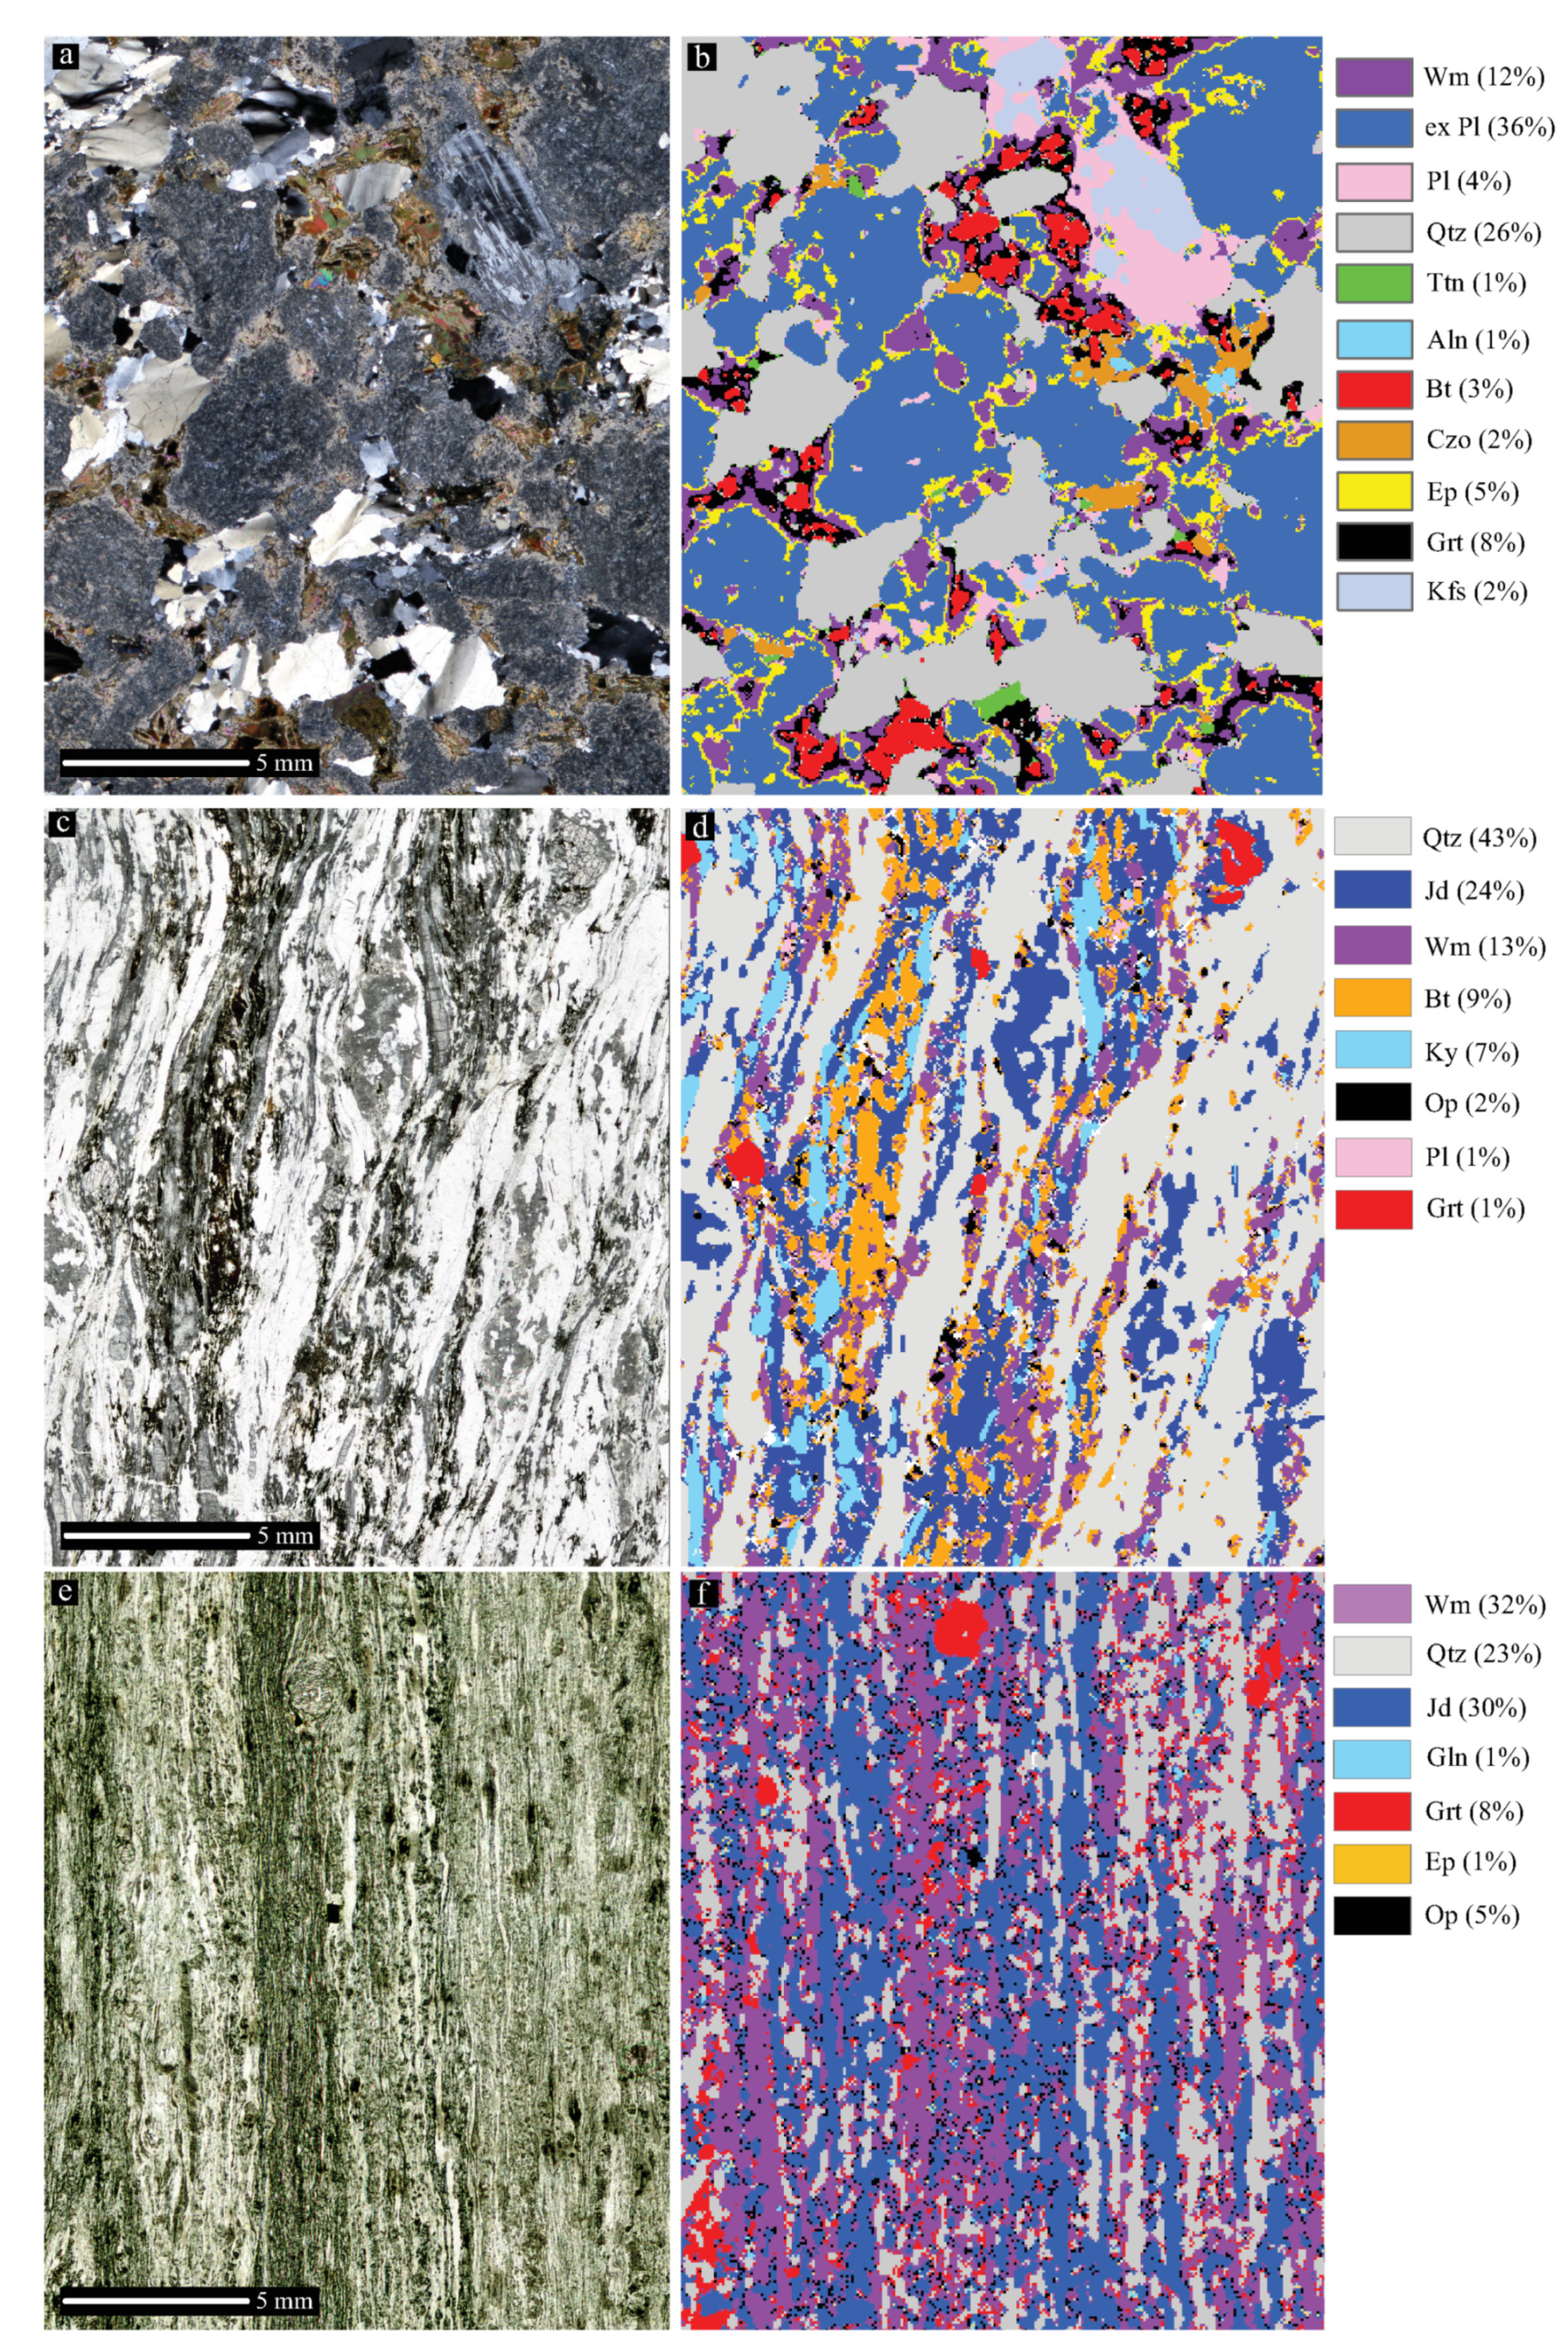 Minerals | Free Full-Text | Quantitative X-ray Maps Analaysis of 